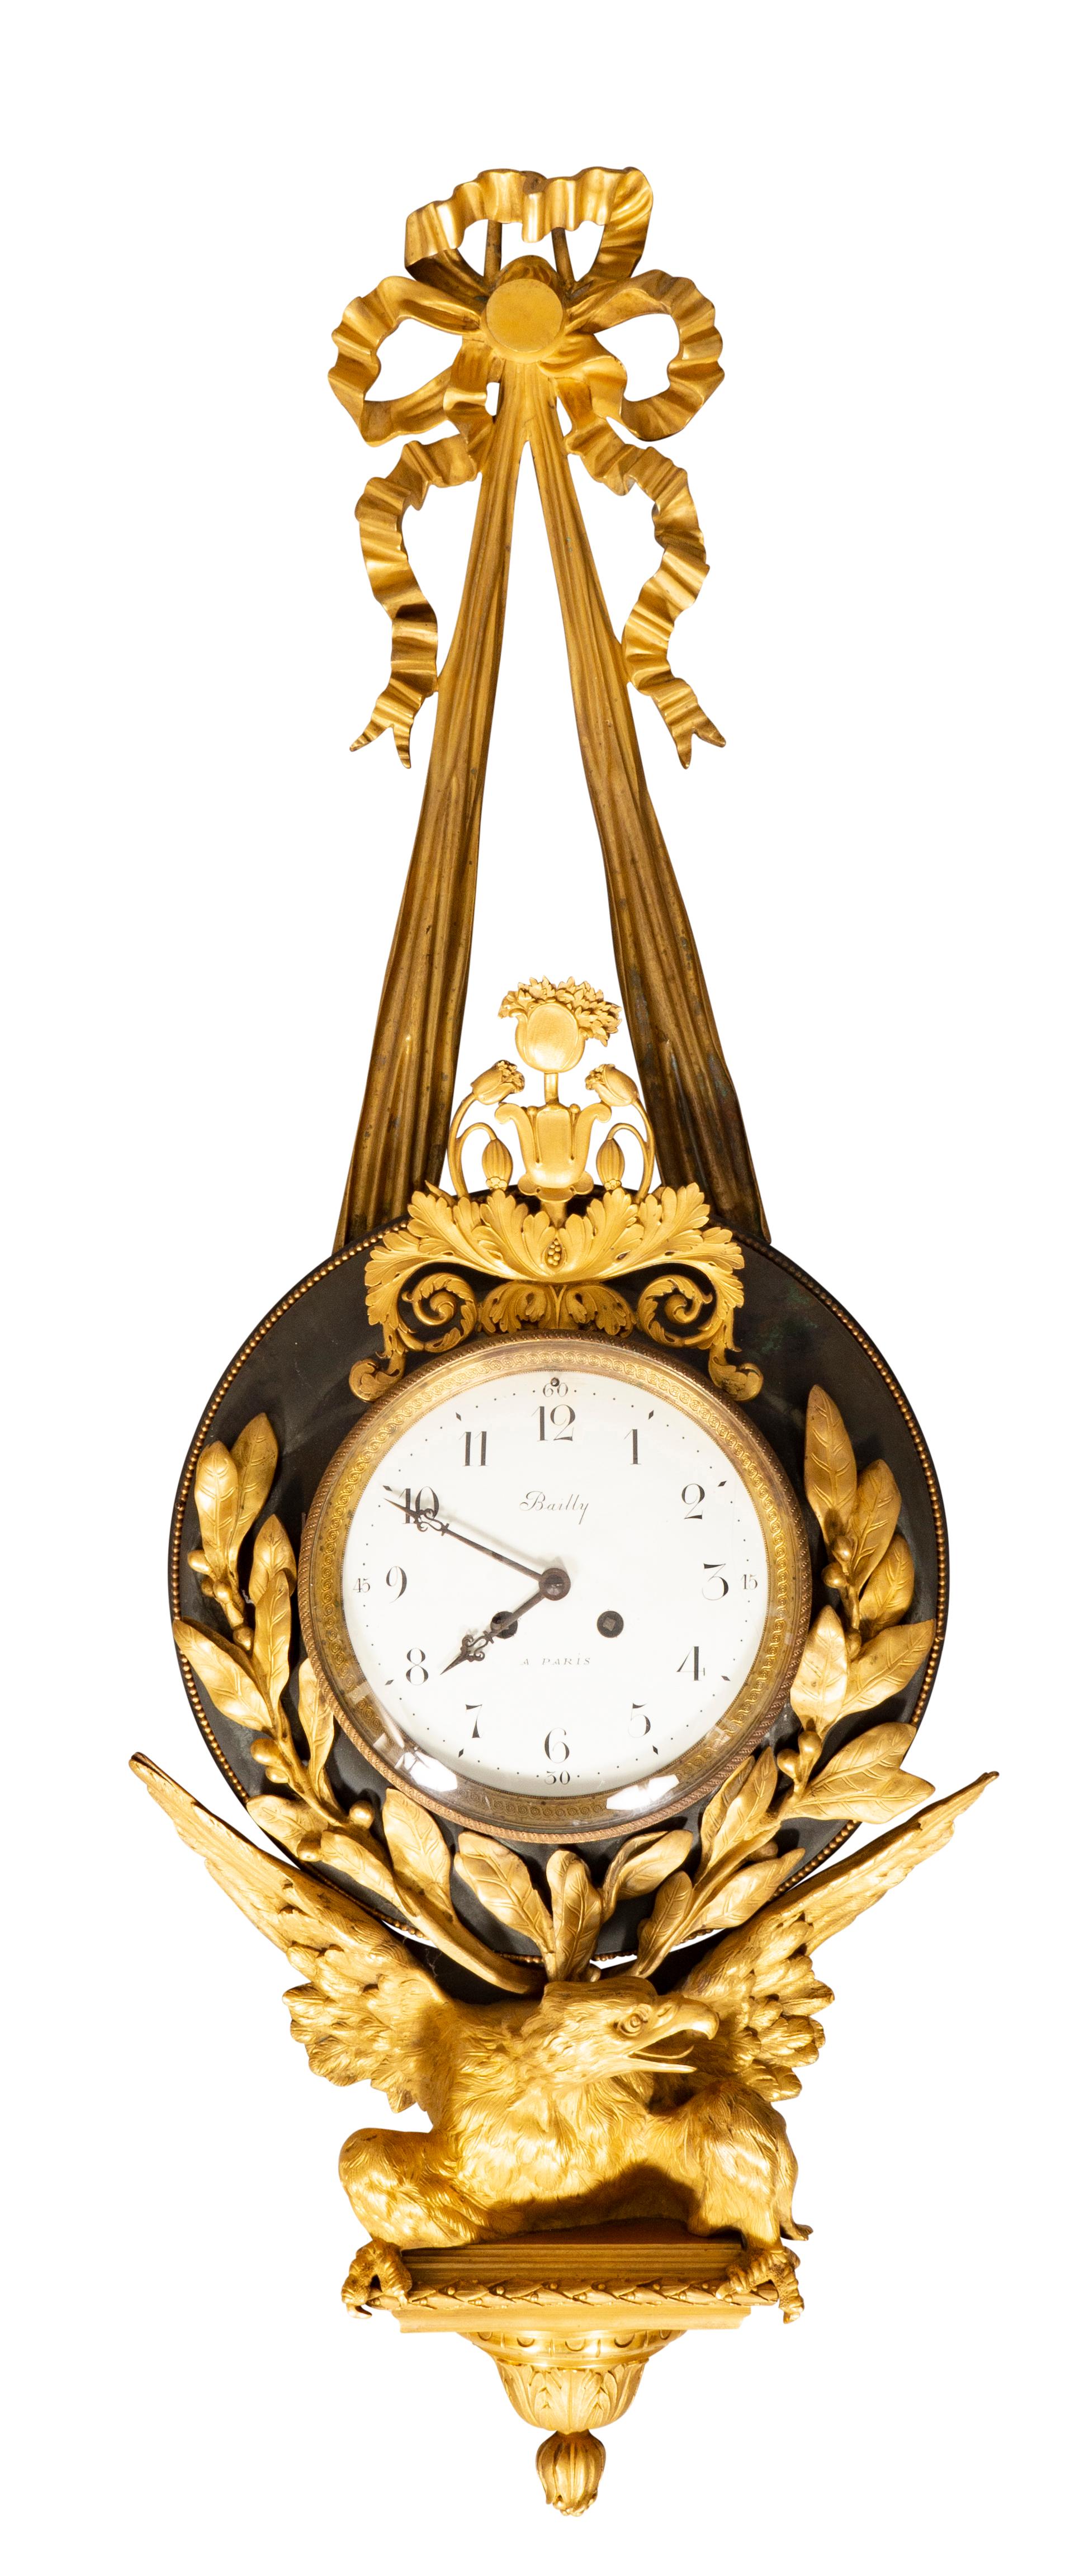 Empire Bronze and Ormolu Cartel Clock by Bailly, Paris For Sale 5